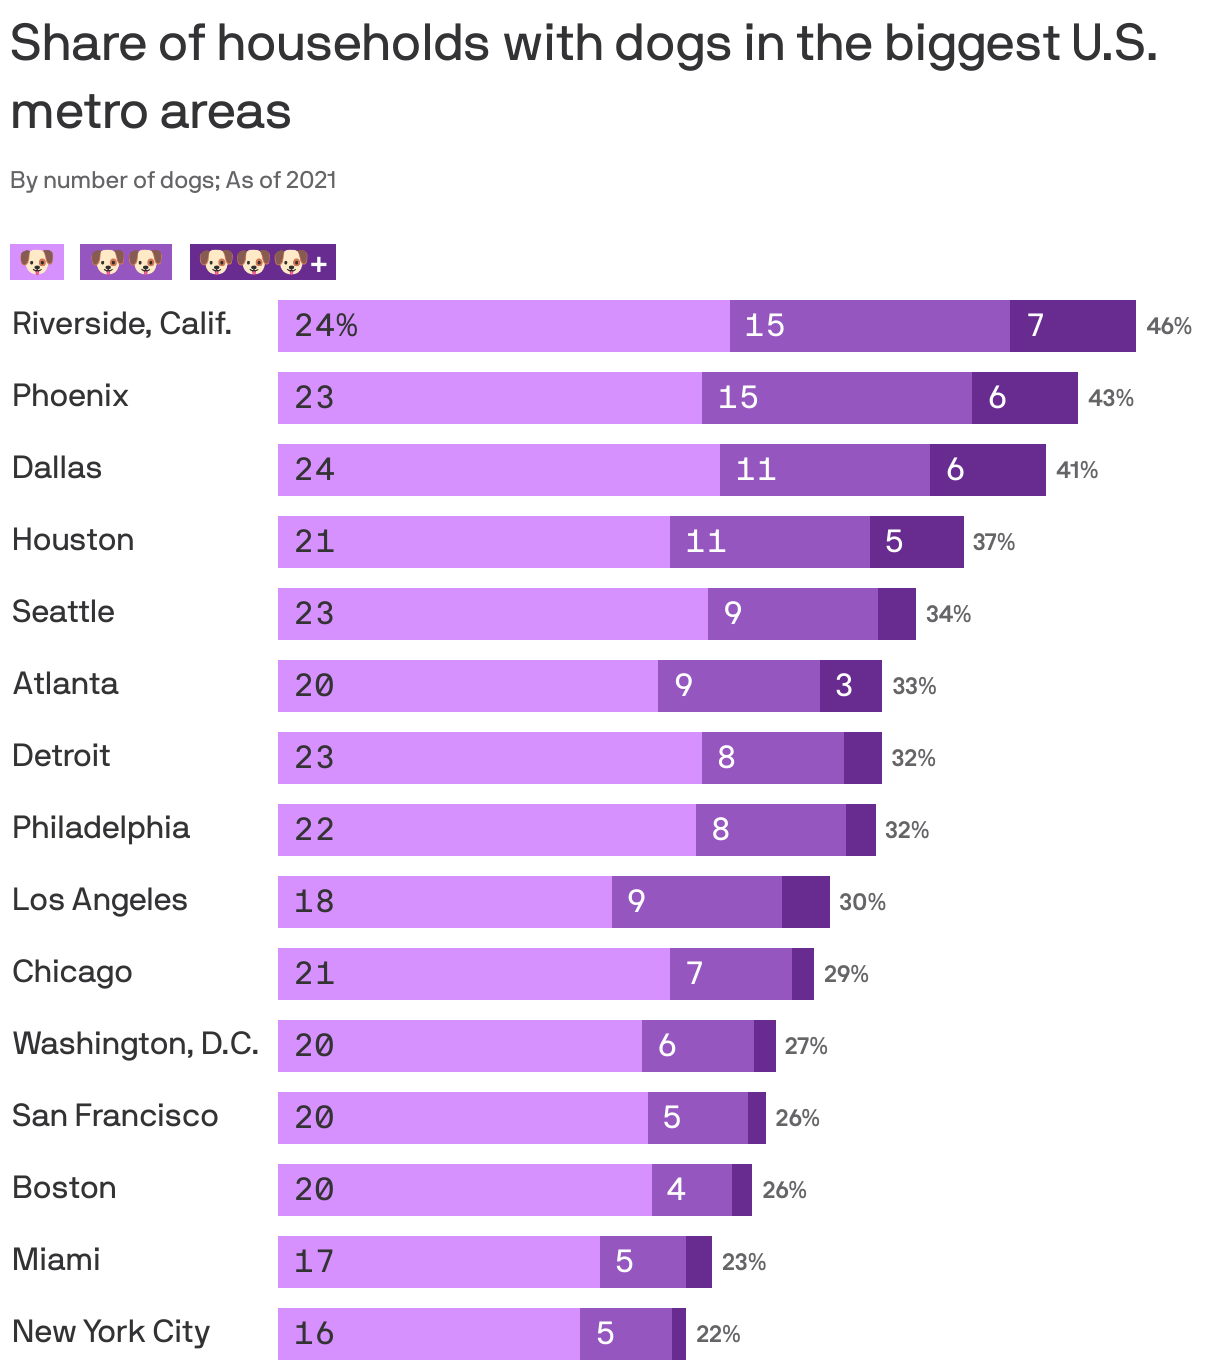 Share of households with dogs in the biggest U.S. metro areas